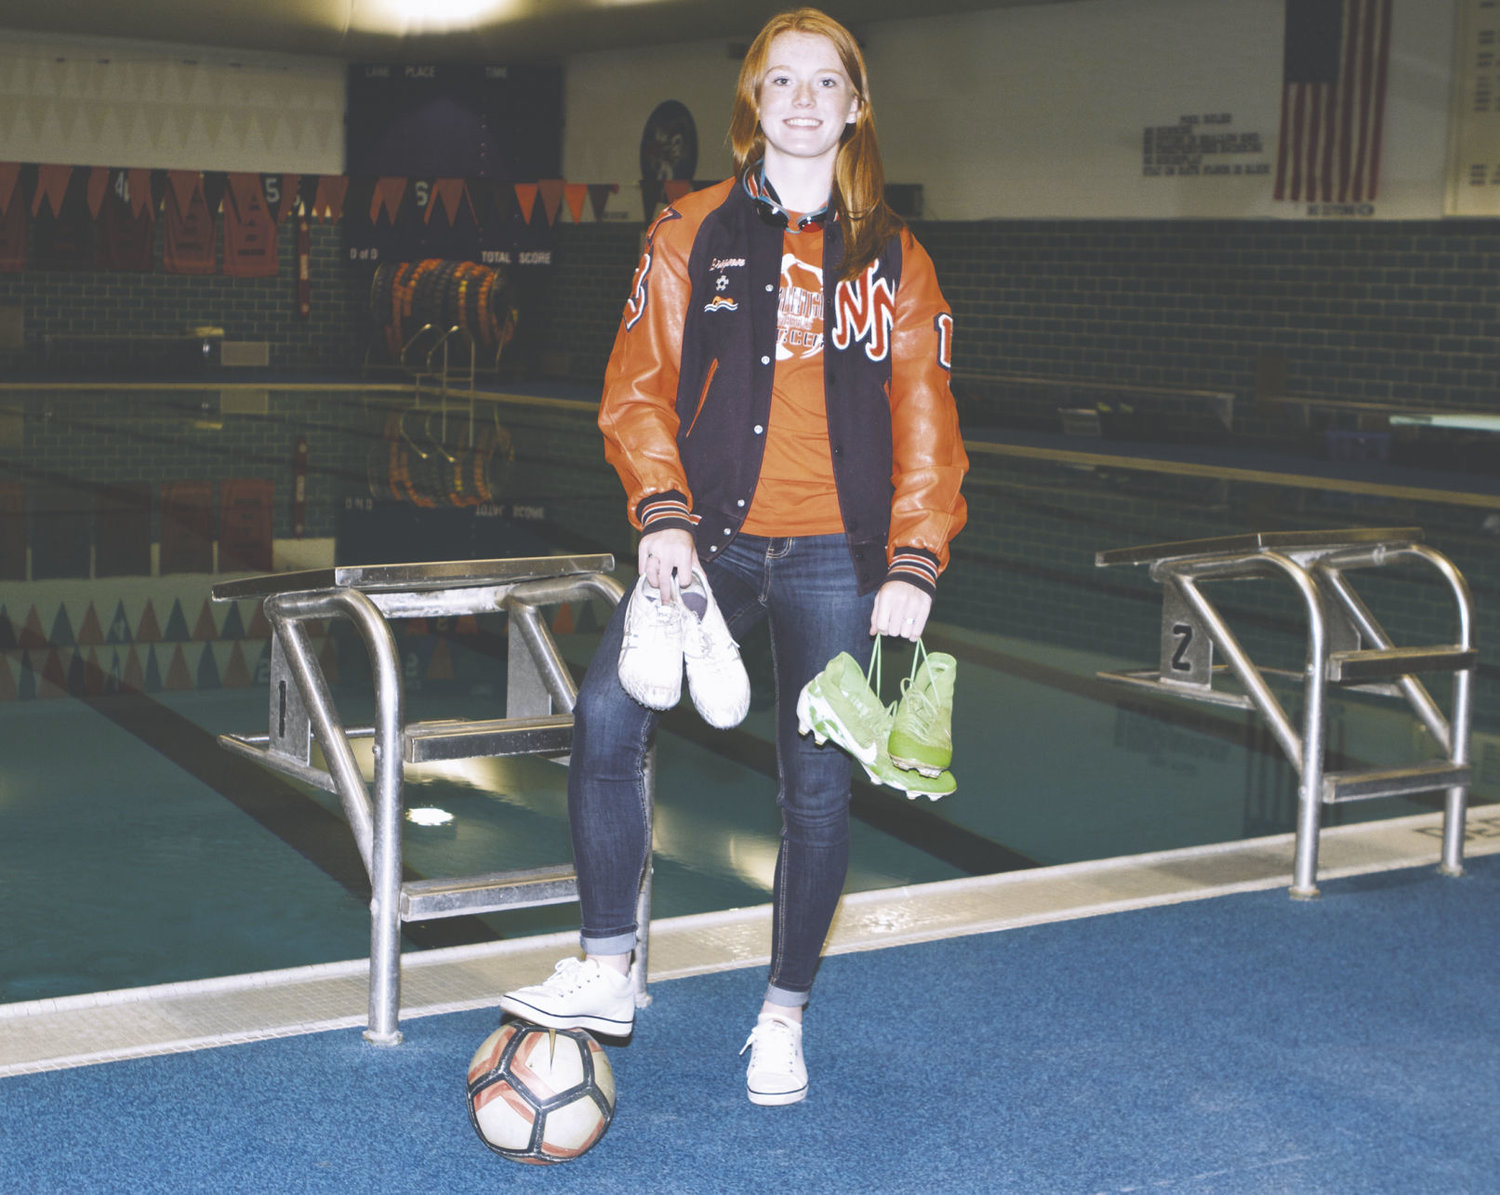 Brynn Anderson shined on the soccer field, in the pool, and on the track for the Chargers.